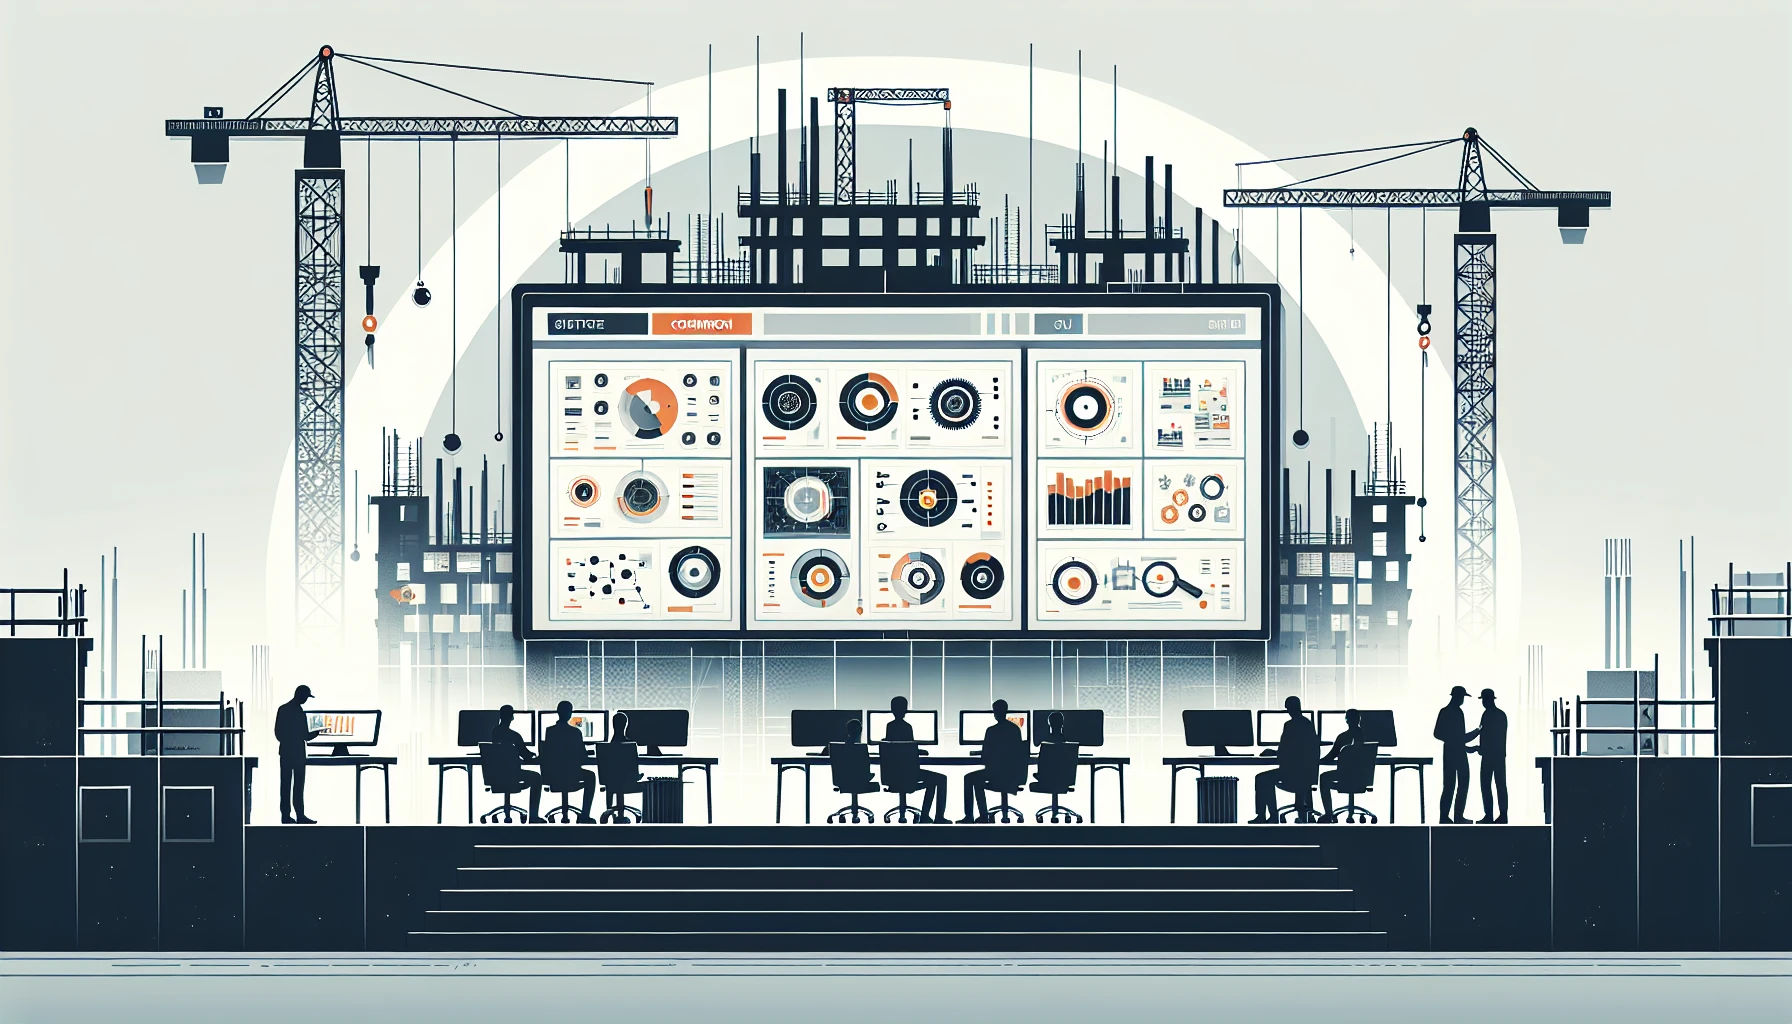 Construction site management system illustration with command center and workers